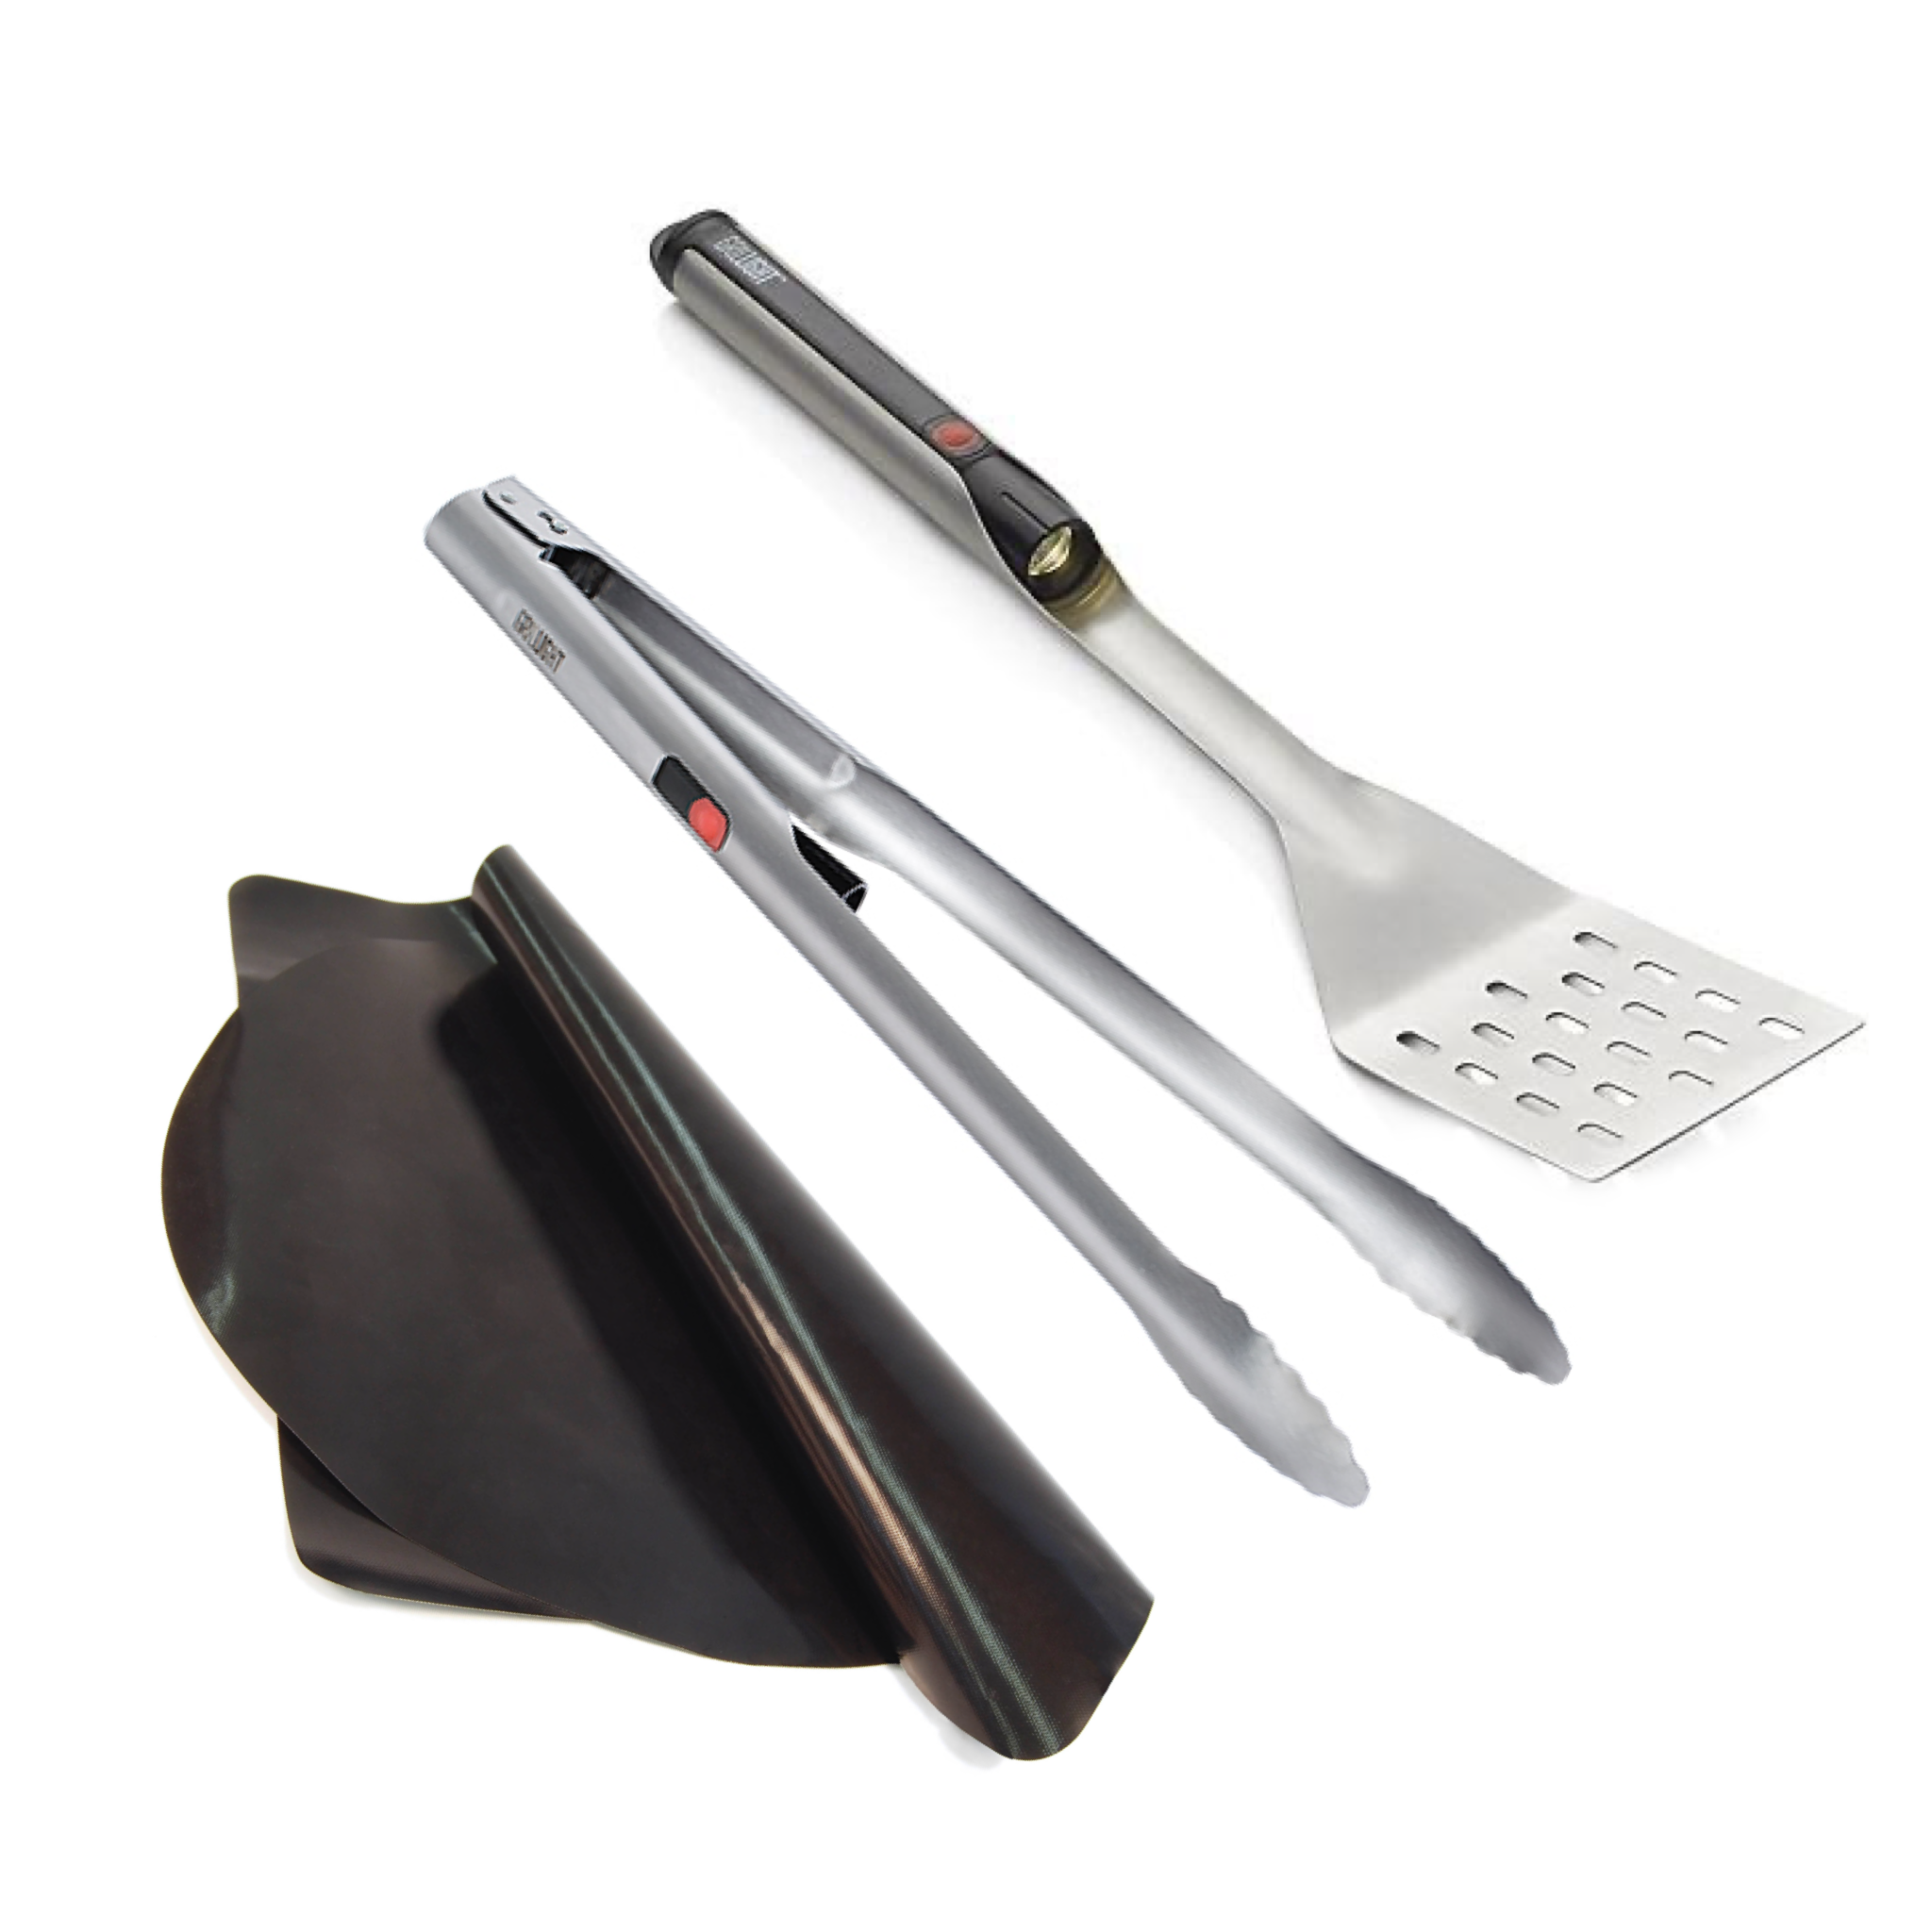 Grilling Essentials Combo Kit by Grillight.com